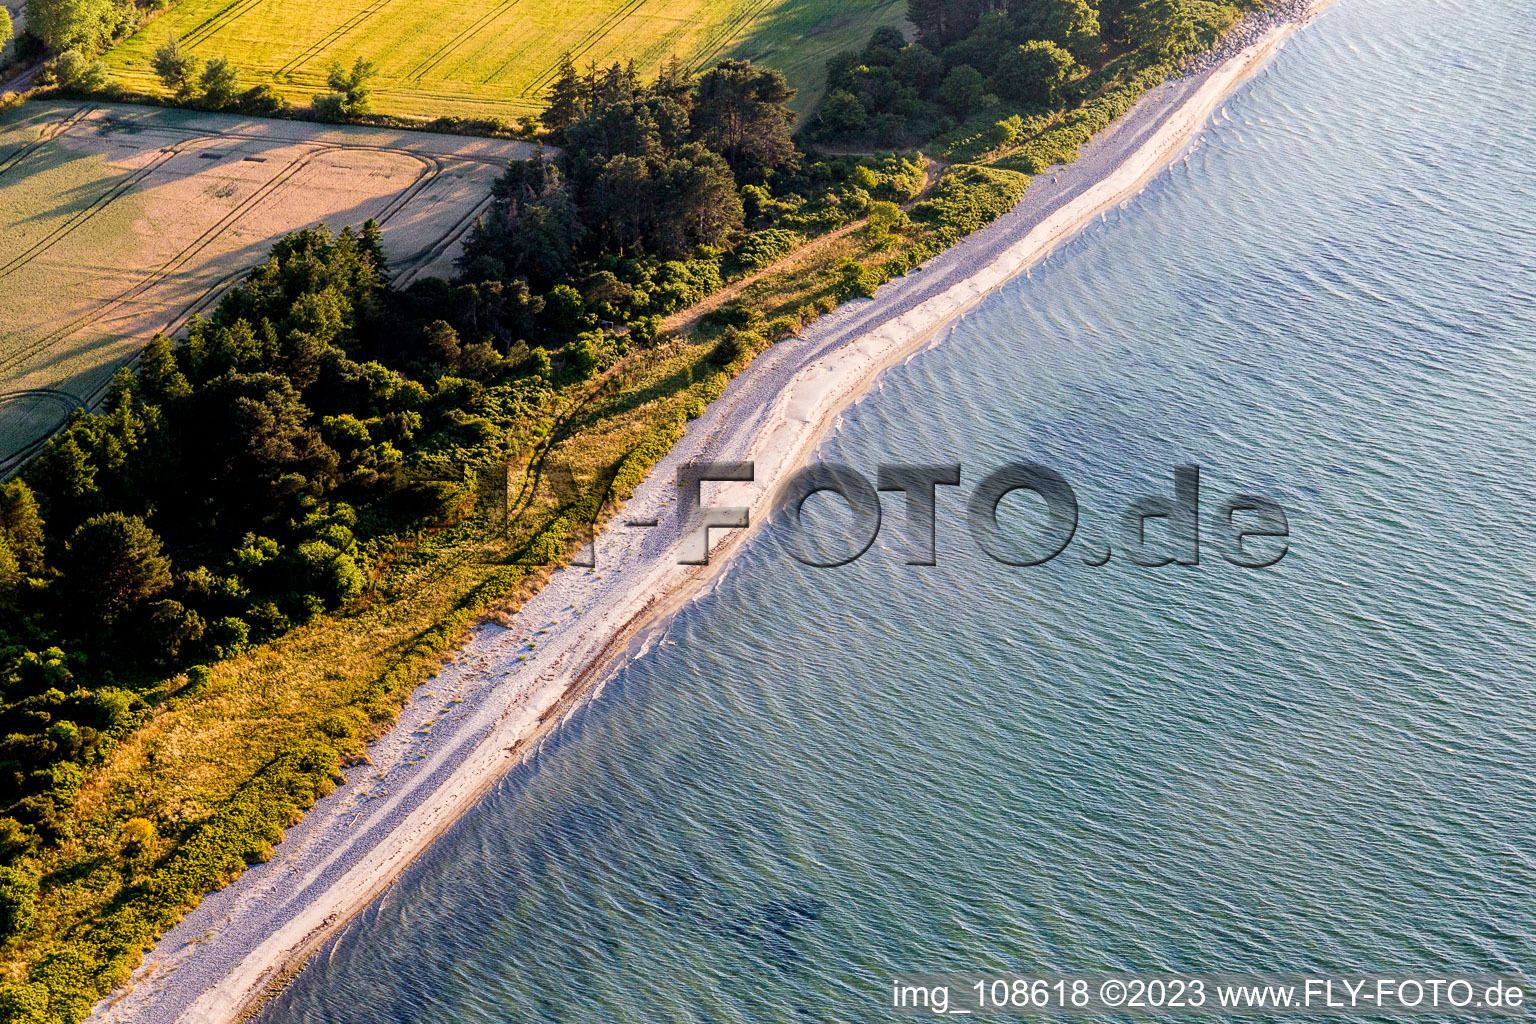 Stege in the state Zealand, Denmark from above